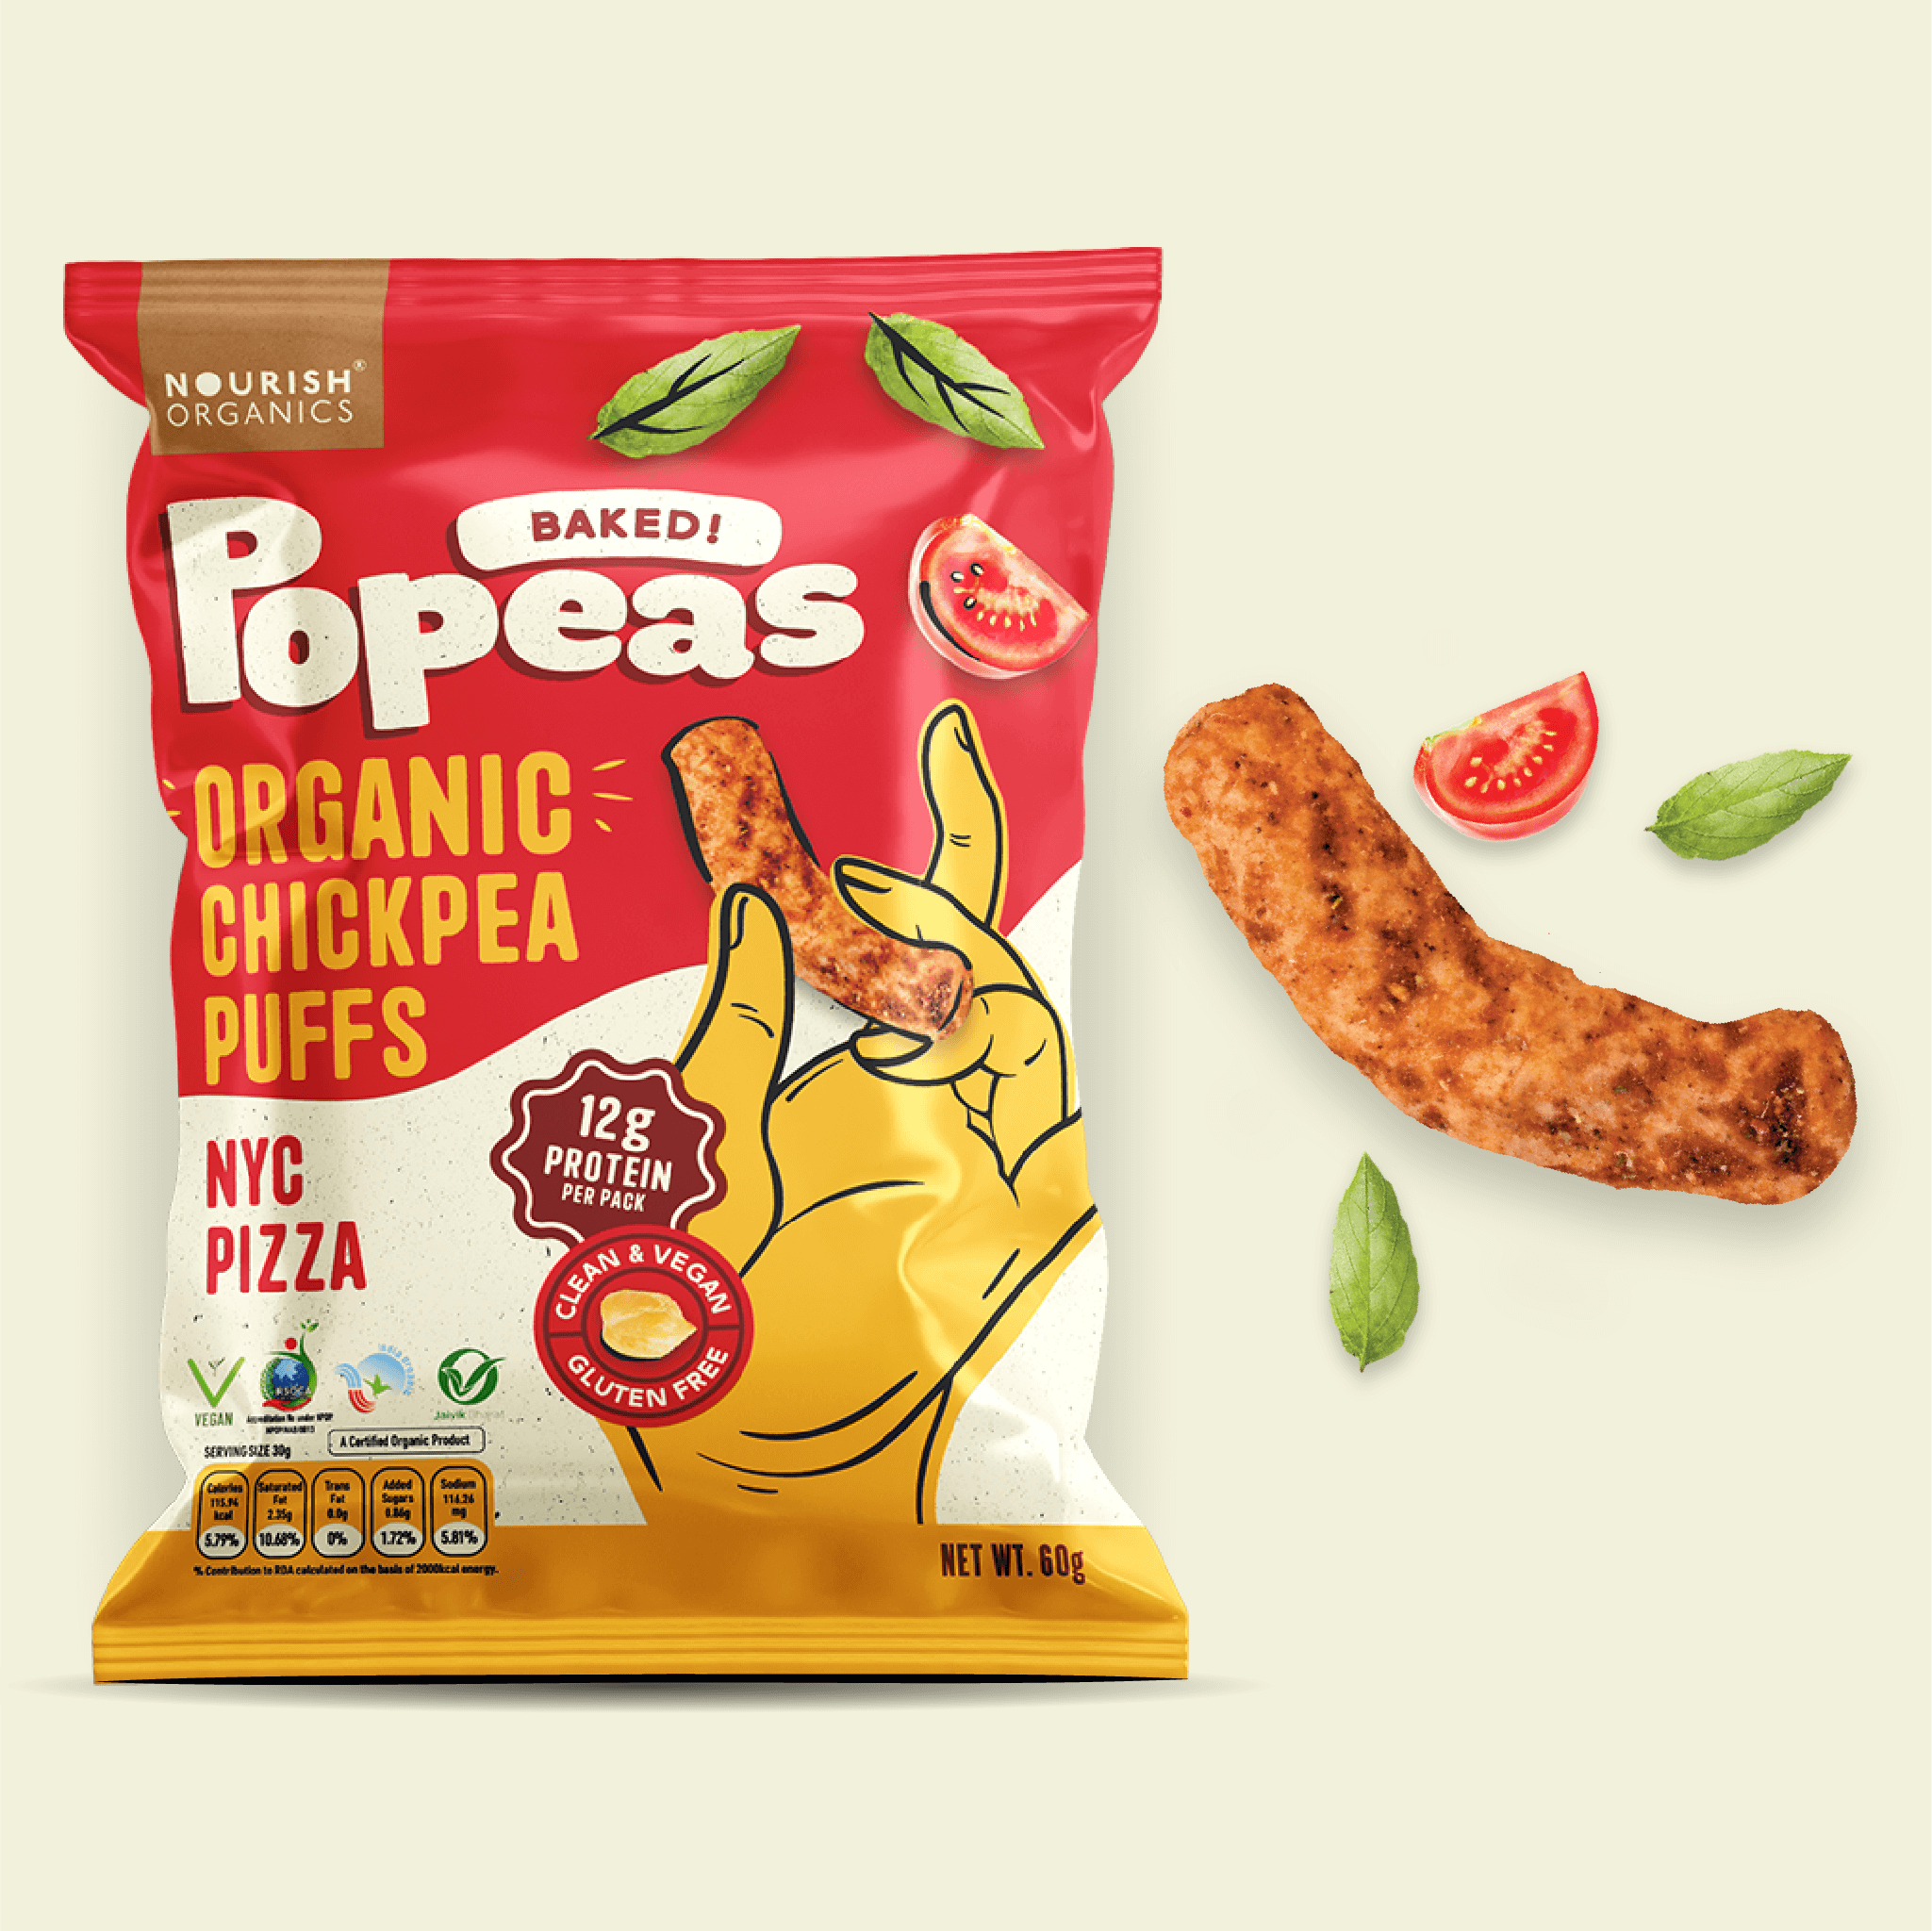 Popeas Organic Chickpea Puffs Product